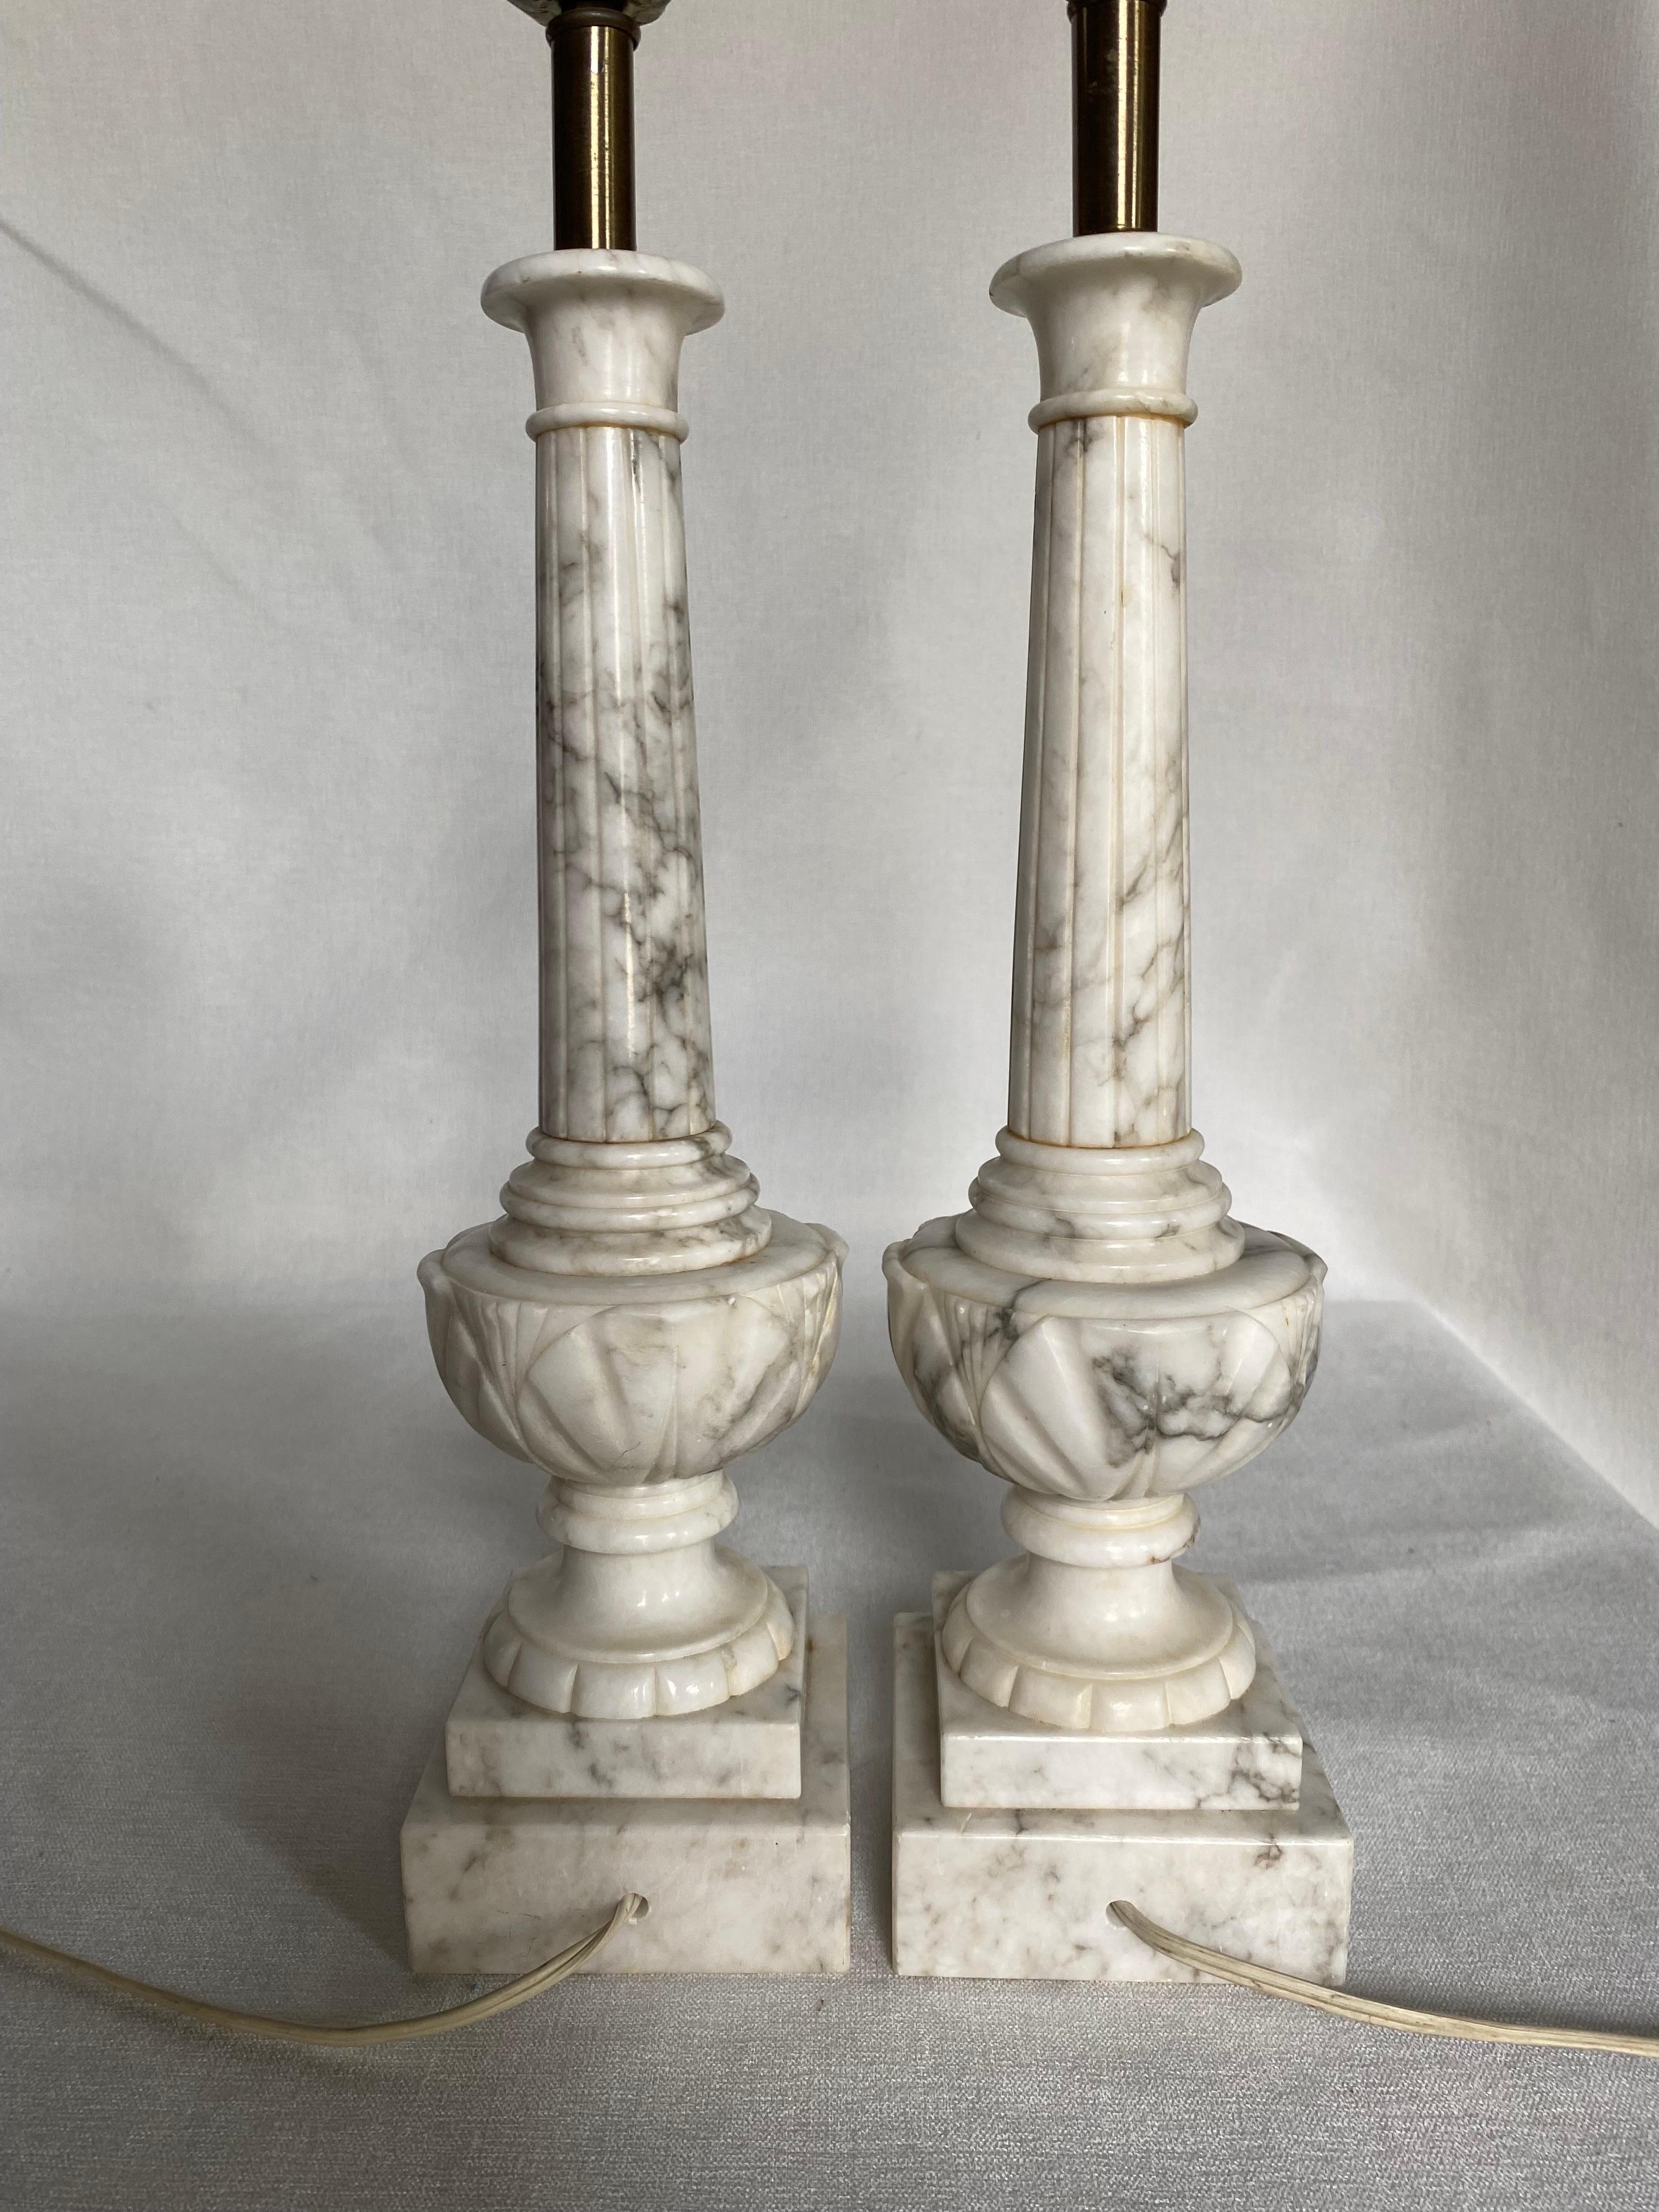 20th Century Italian Carved Fluted Column Marble Urn Table Lamps, Pair